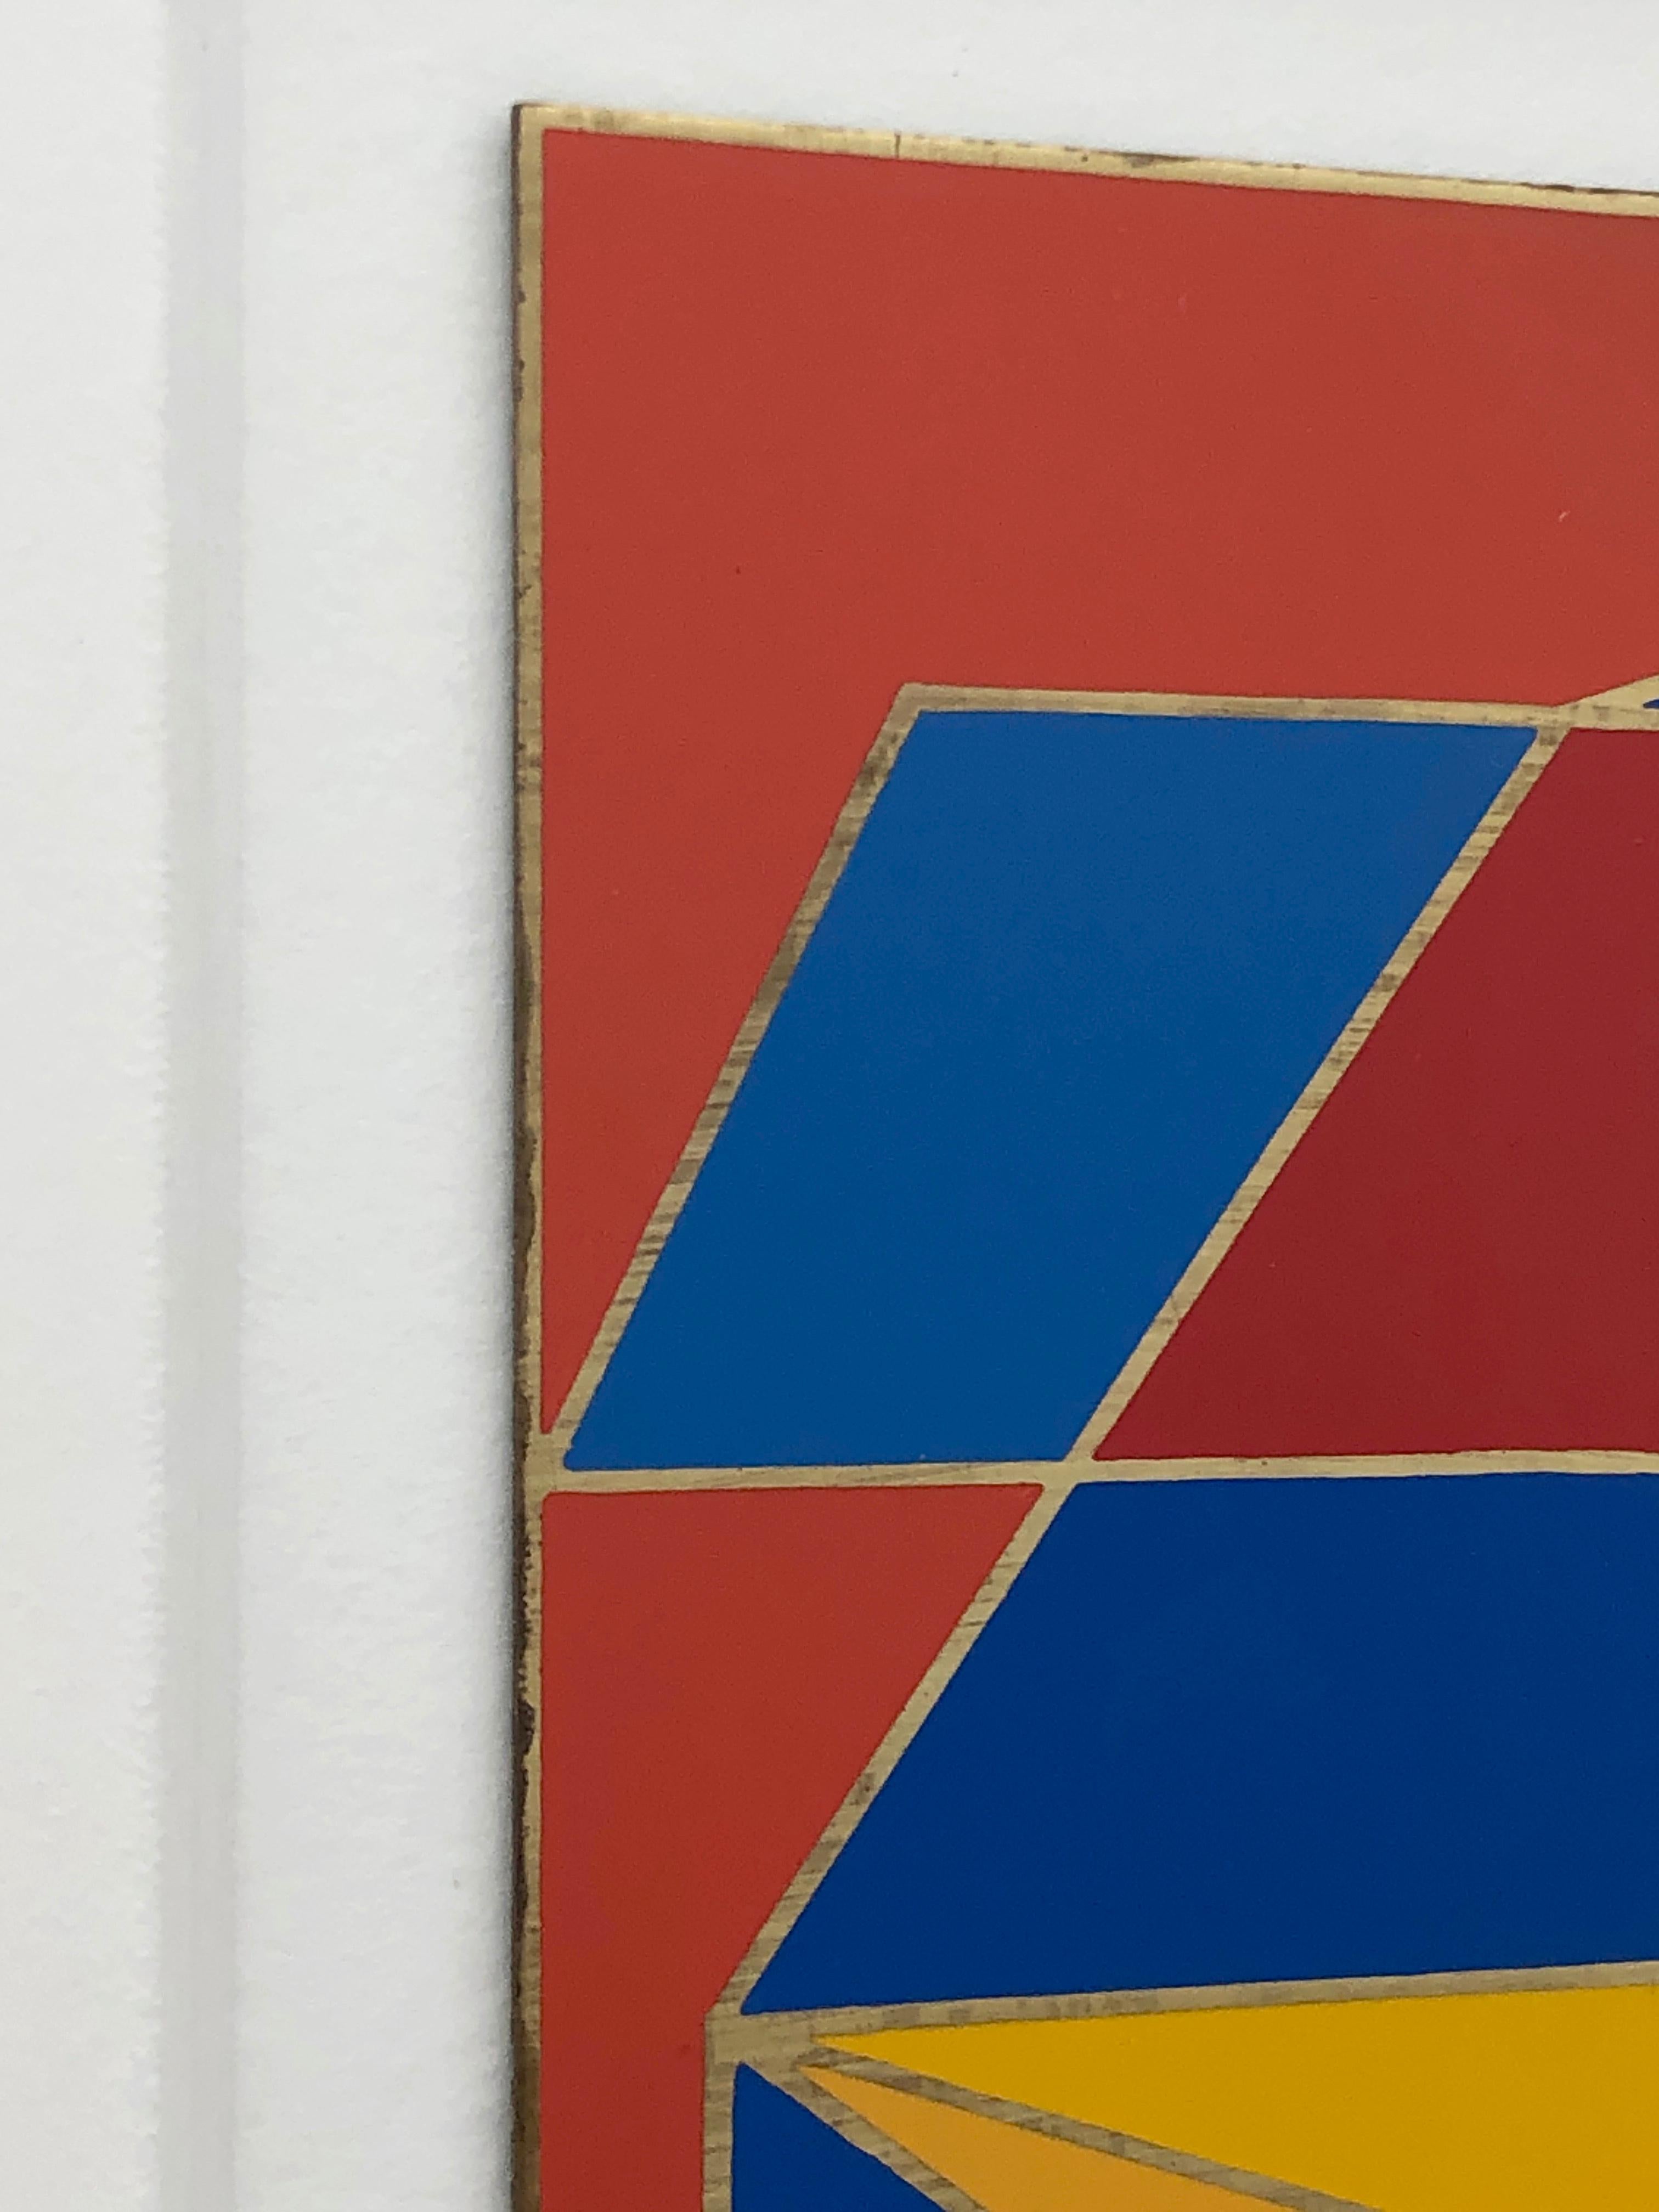 20th Century Robert Indiana Enamel on Metal, Star of Hope, 1972 in Red, Blue, Yellow & Green